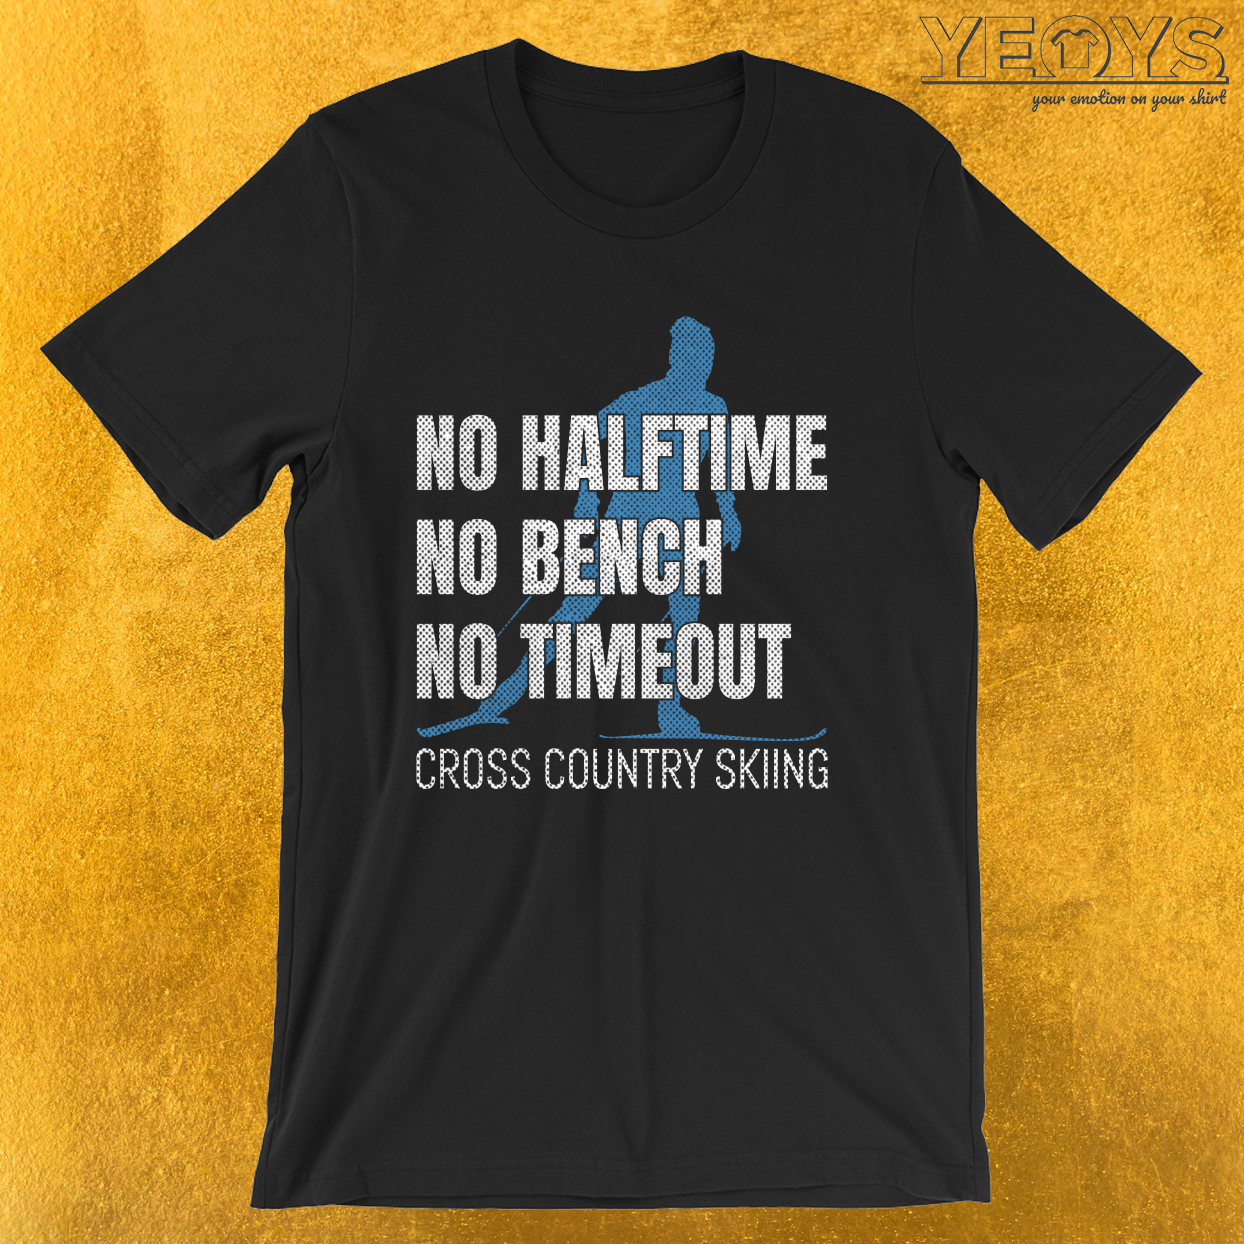 No Halftime No Bench No Timeout – Cross Country Skiing Tee